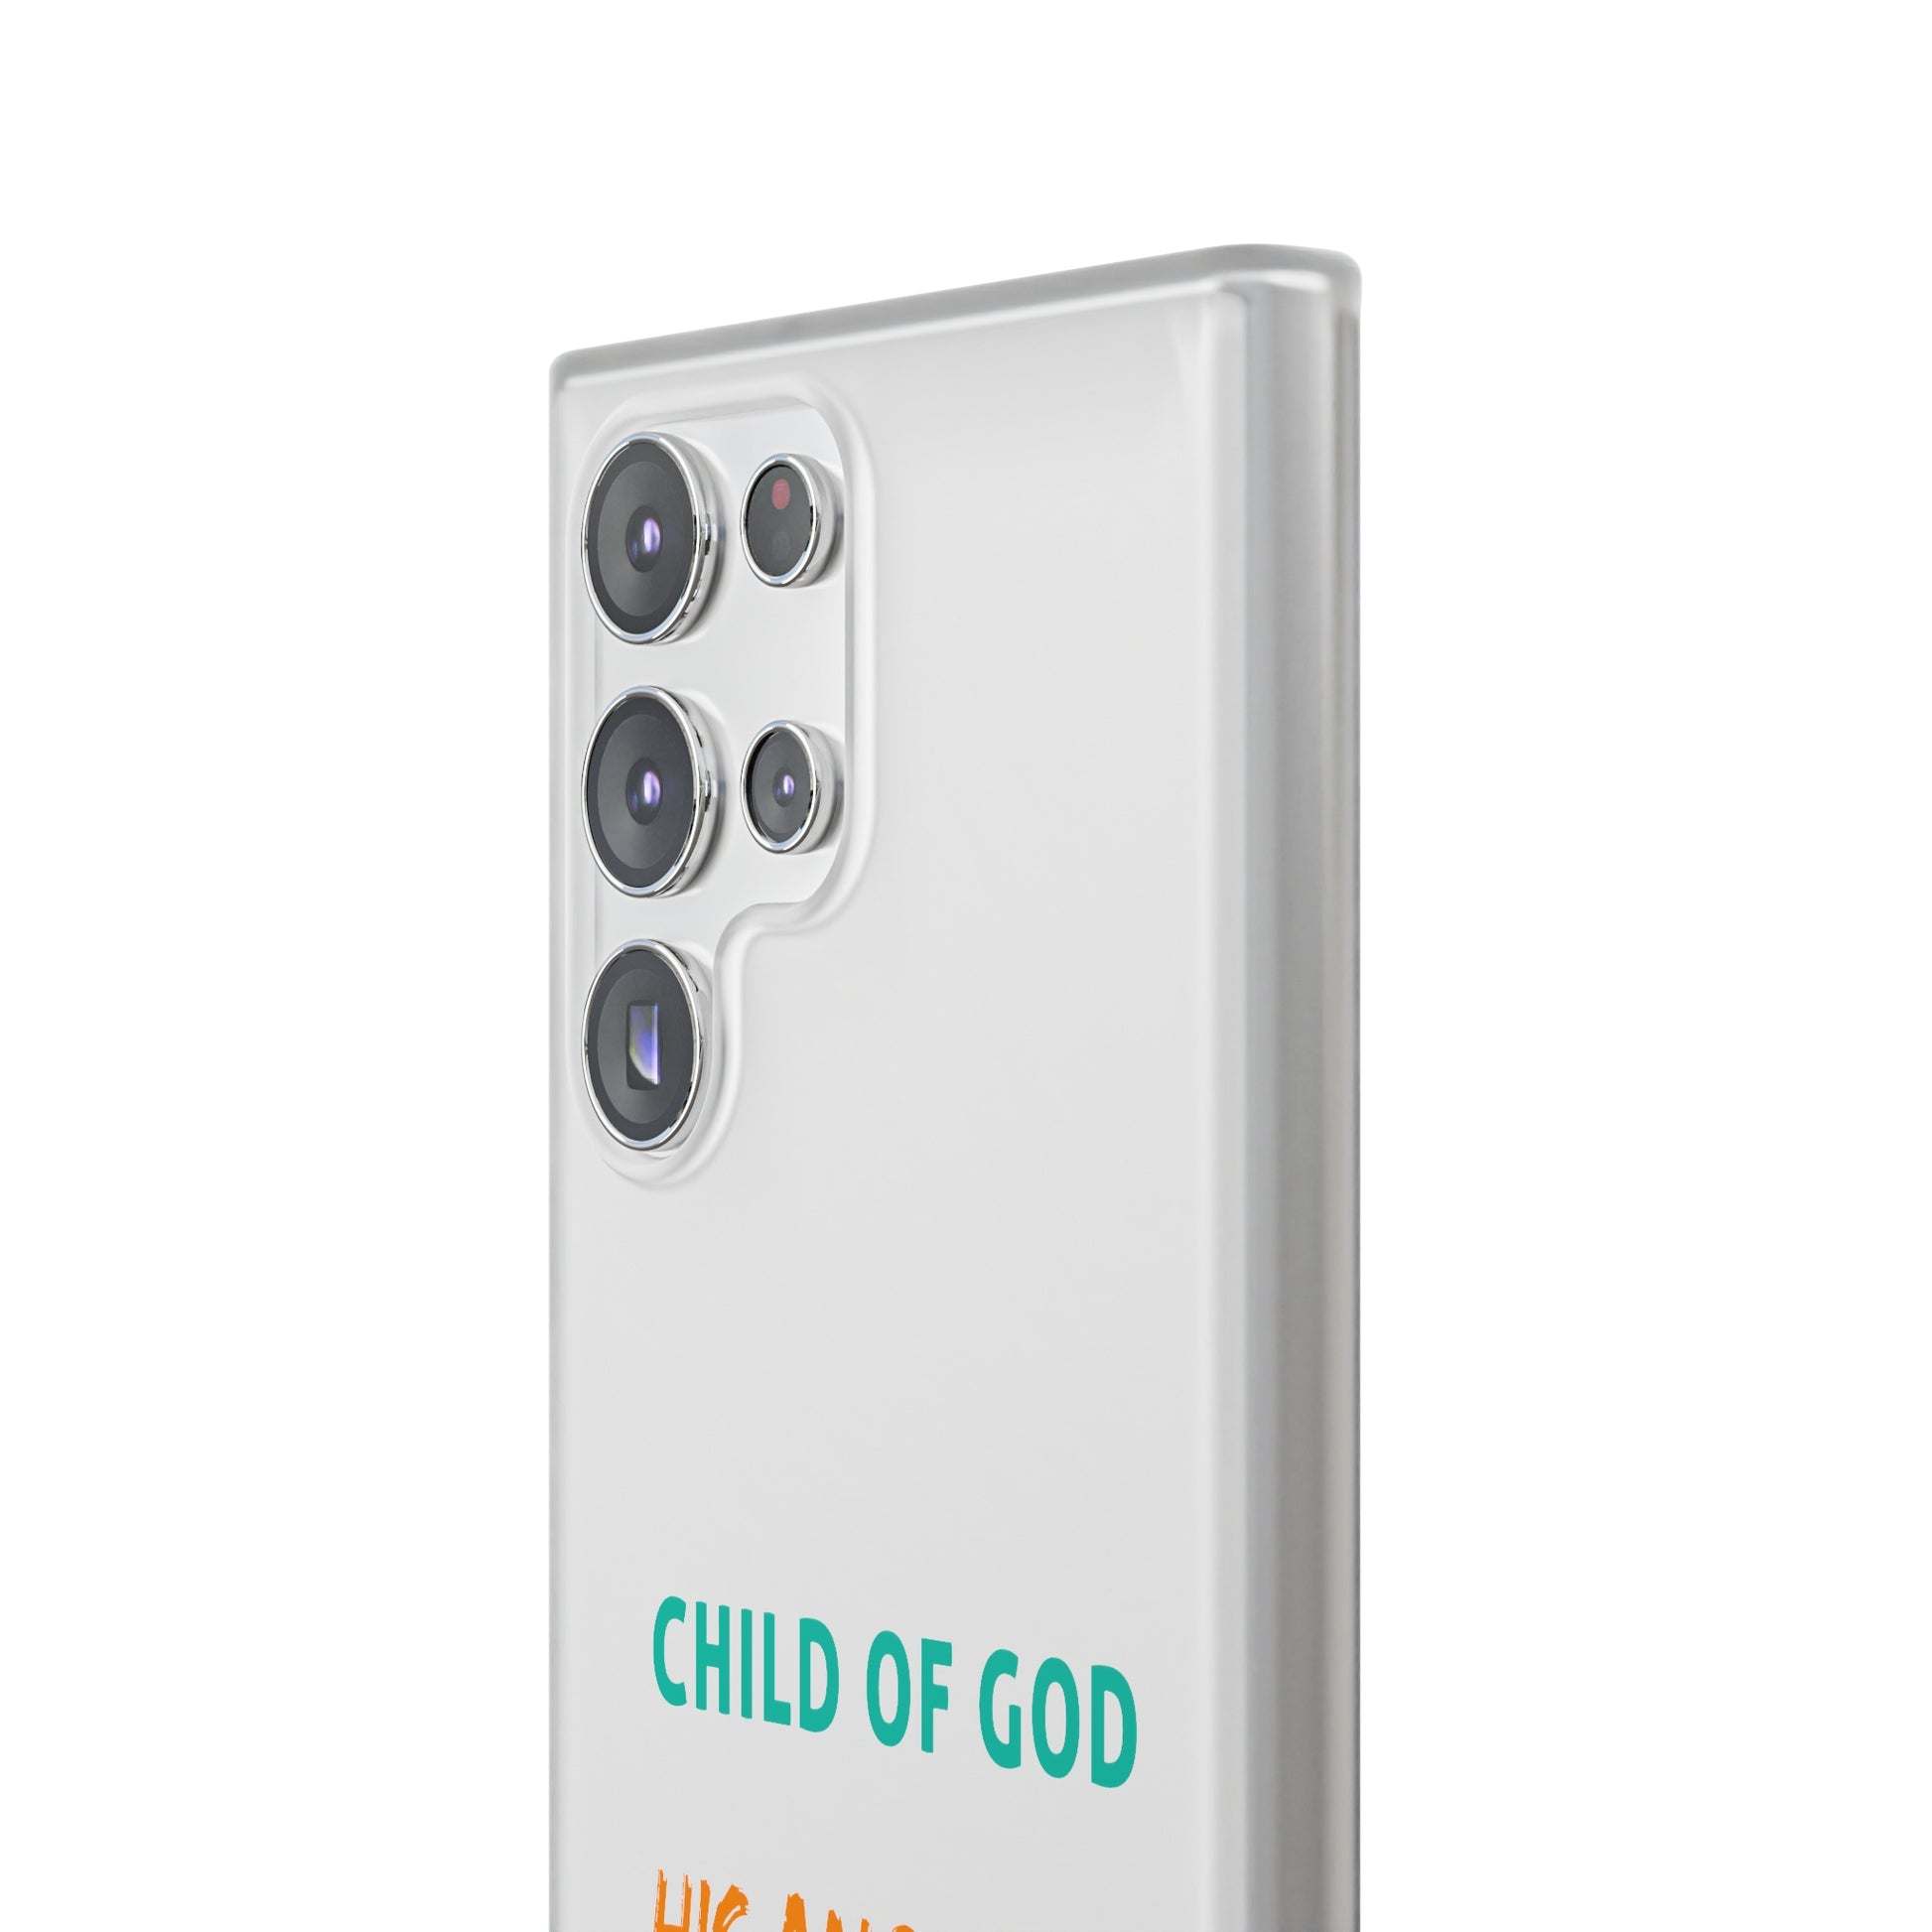 Child Of God Touch Not His Anointed Christian Flexi Phone Case Printify